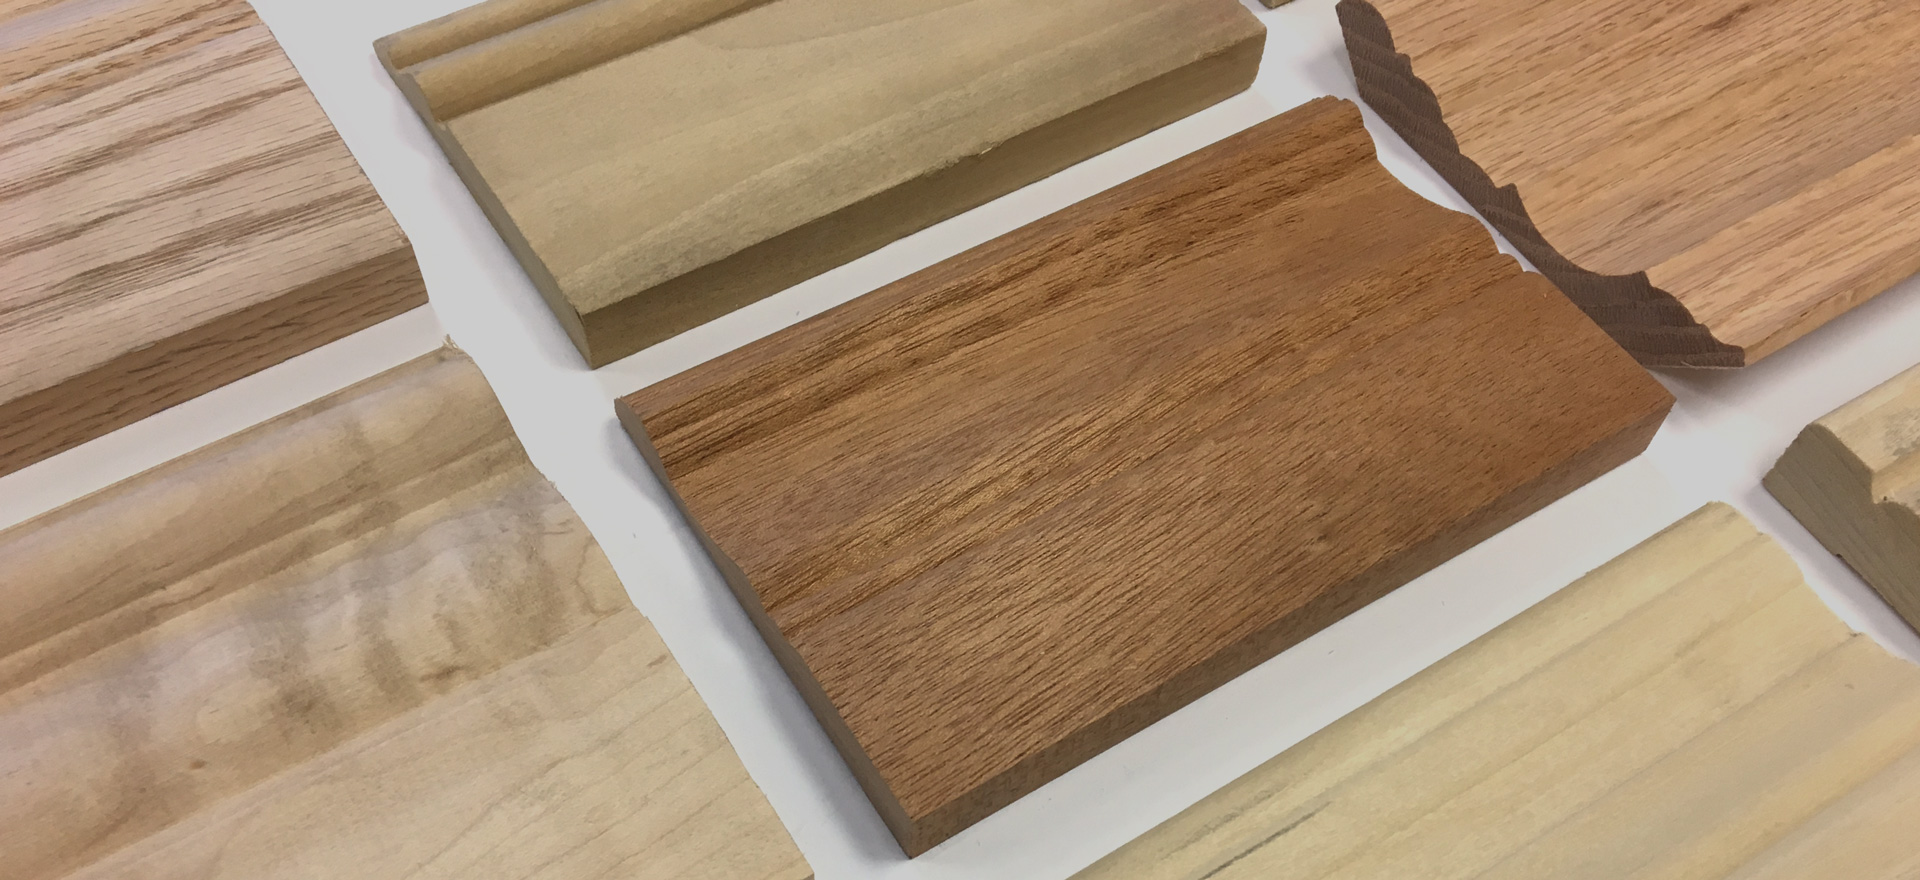 Pieces of hardwood moulding  samples in different species laid out on a white table